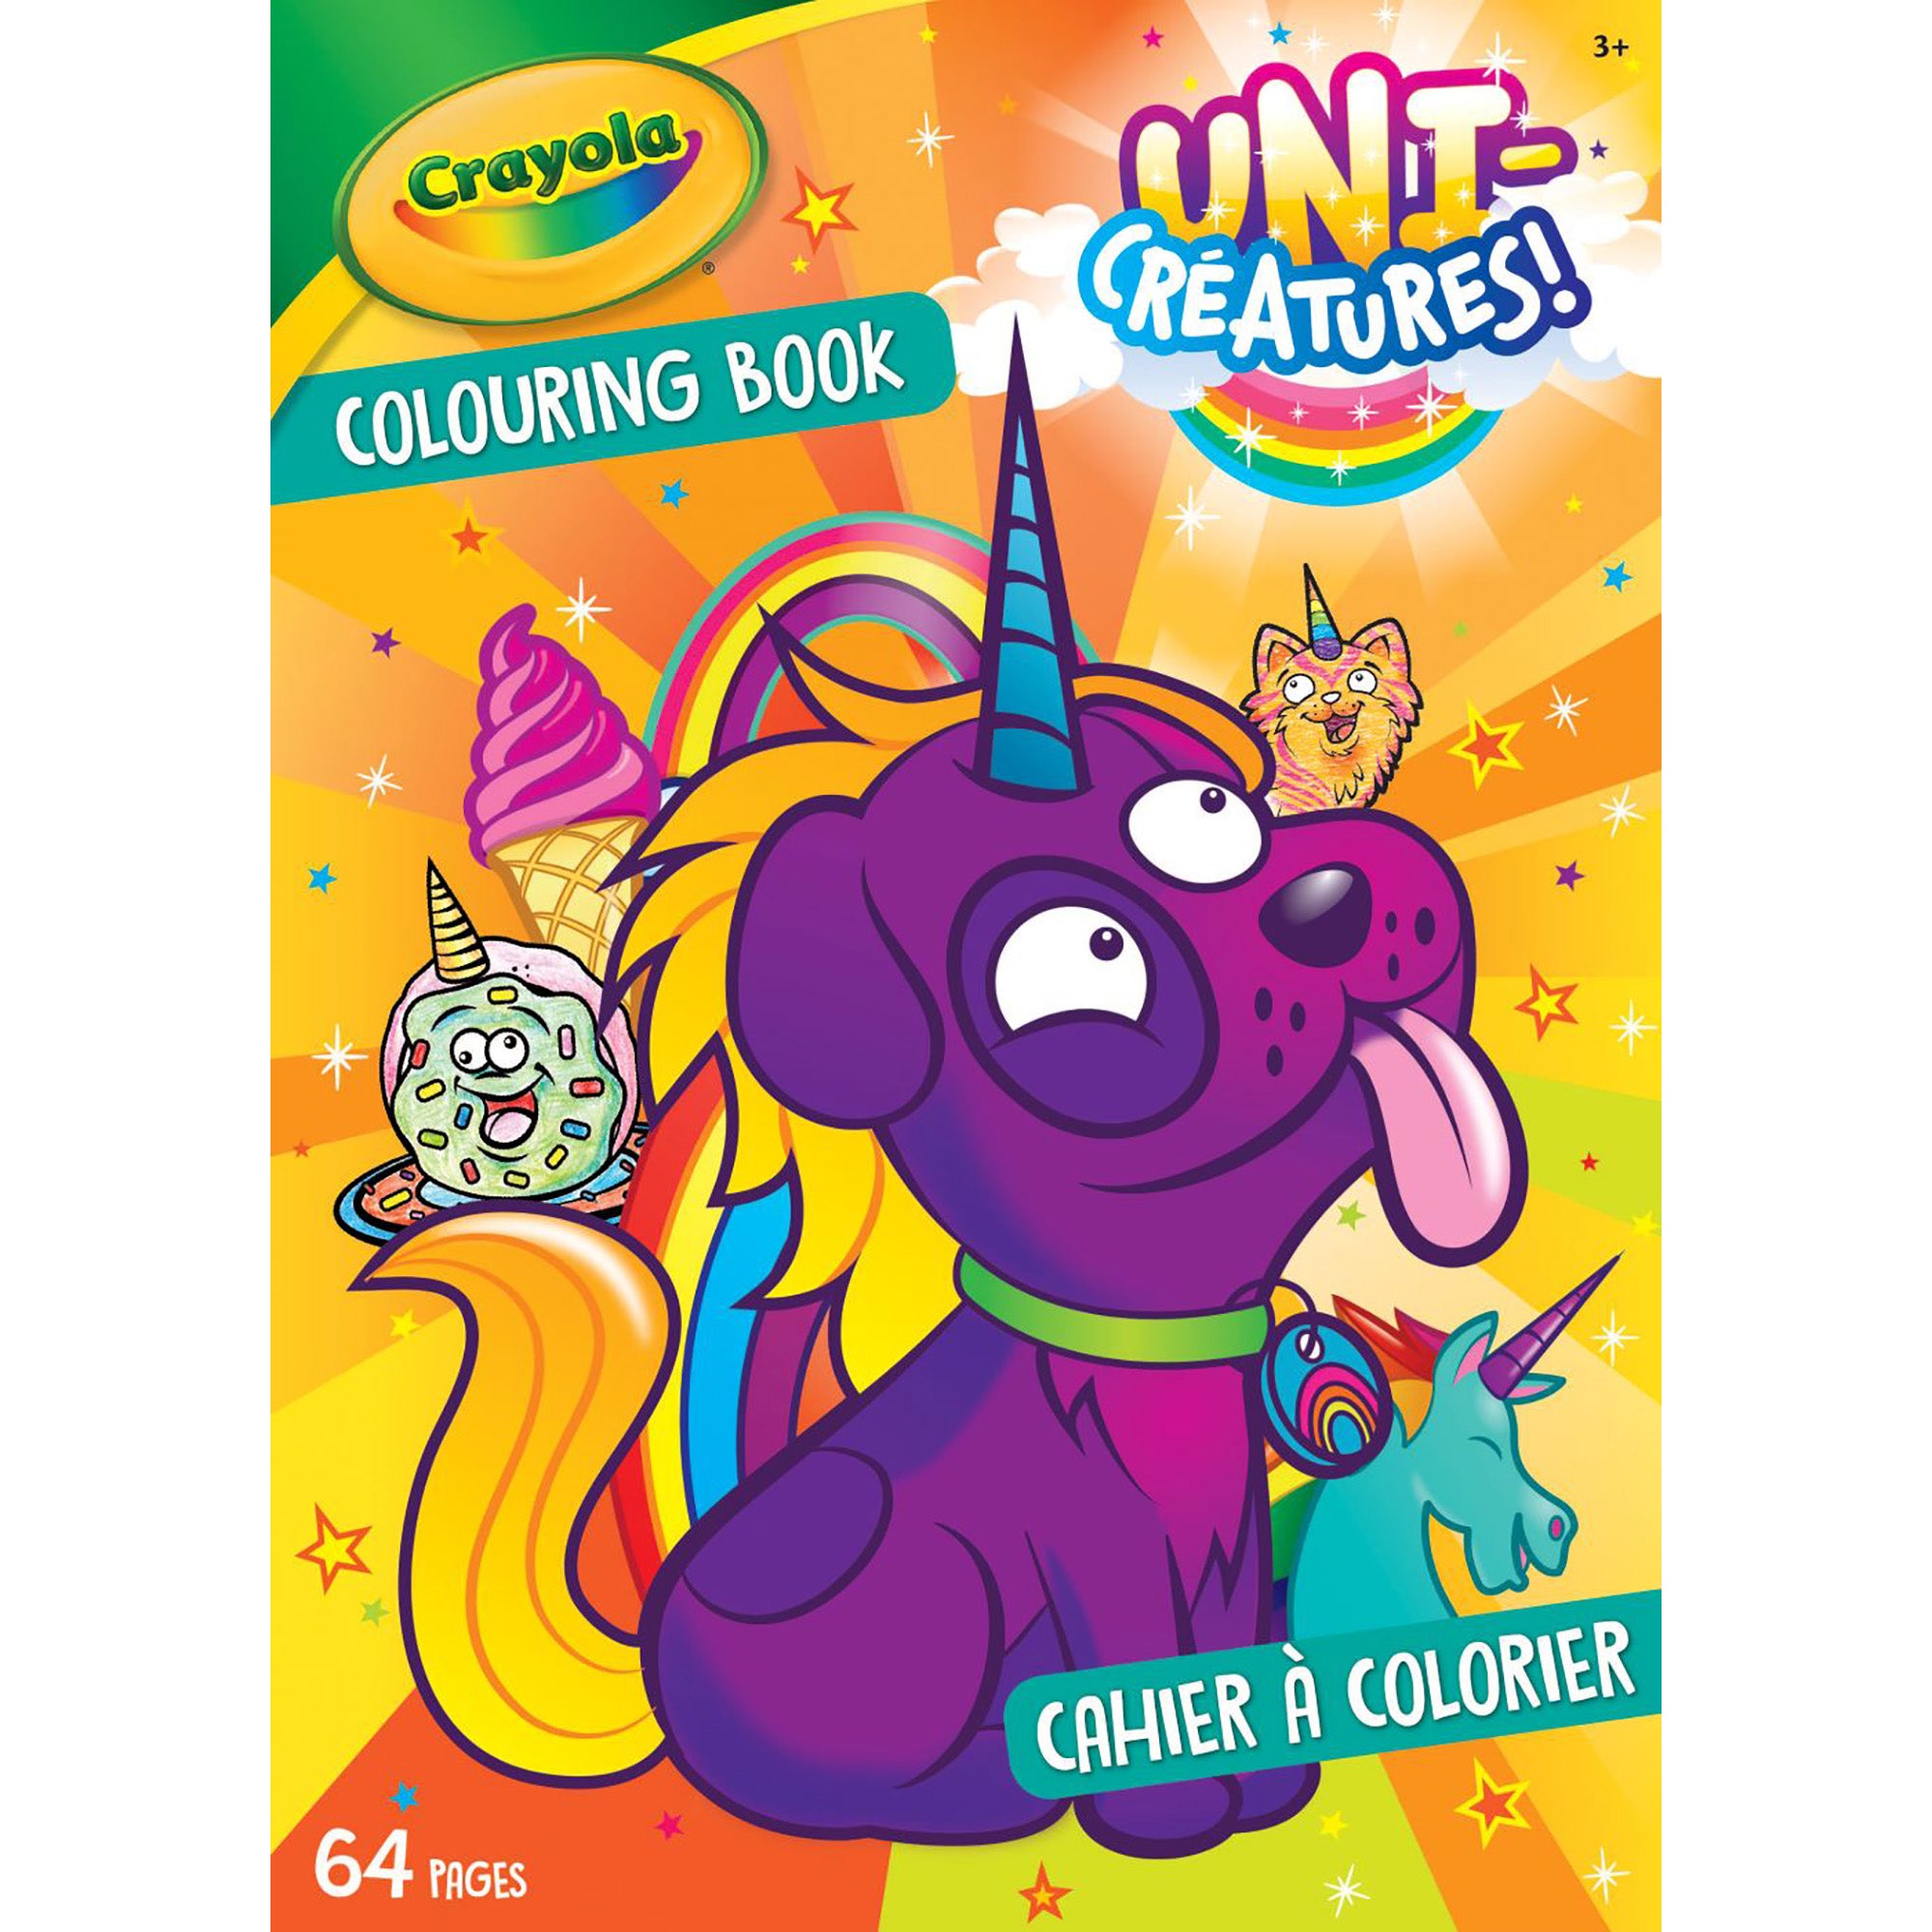 Crayola Coloring Book - 64 Pages 7.75x10.75in